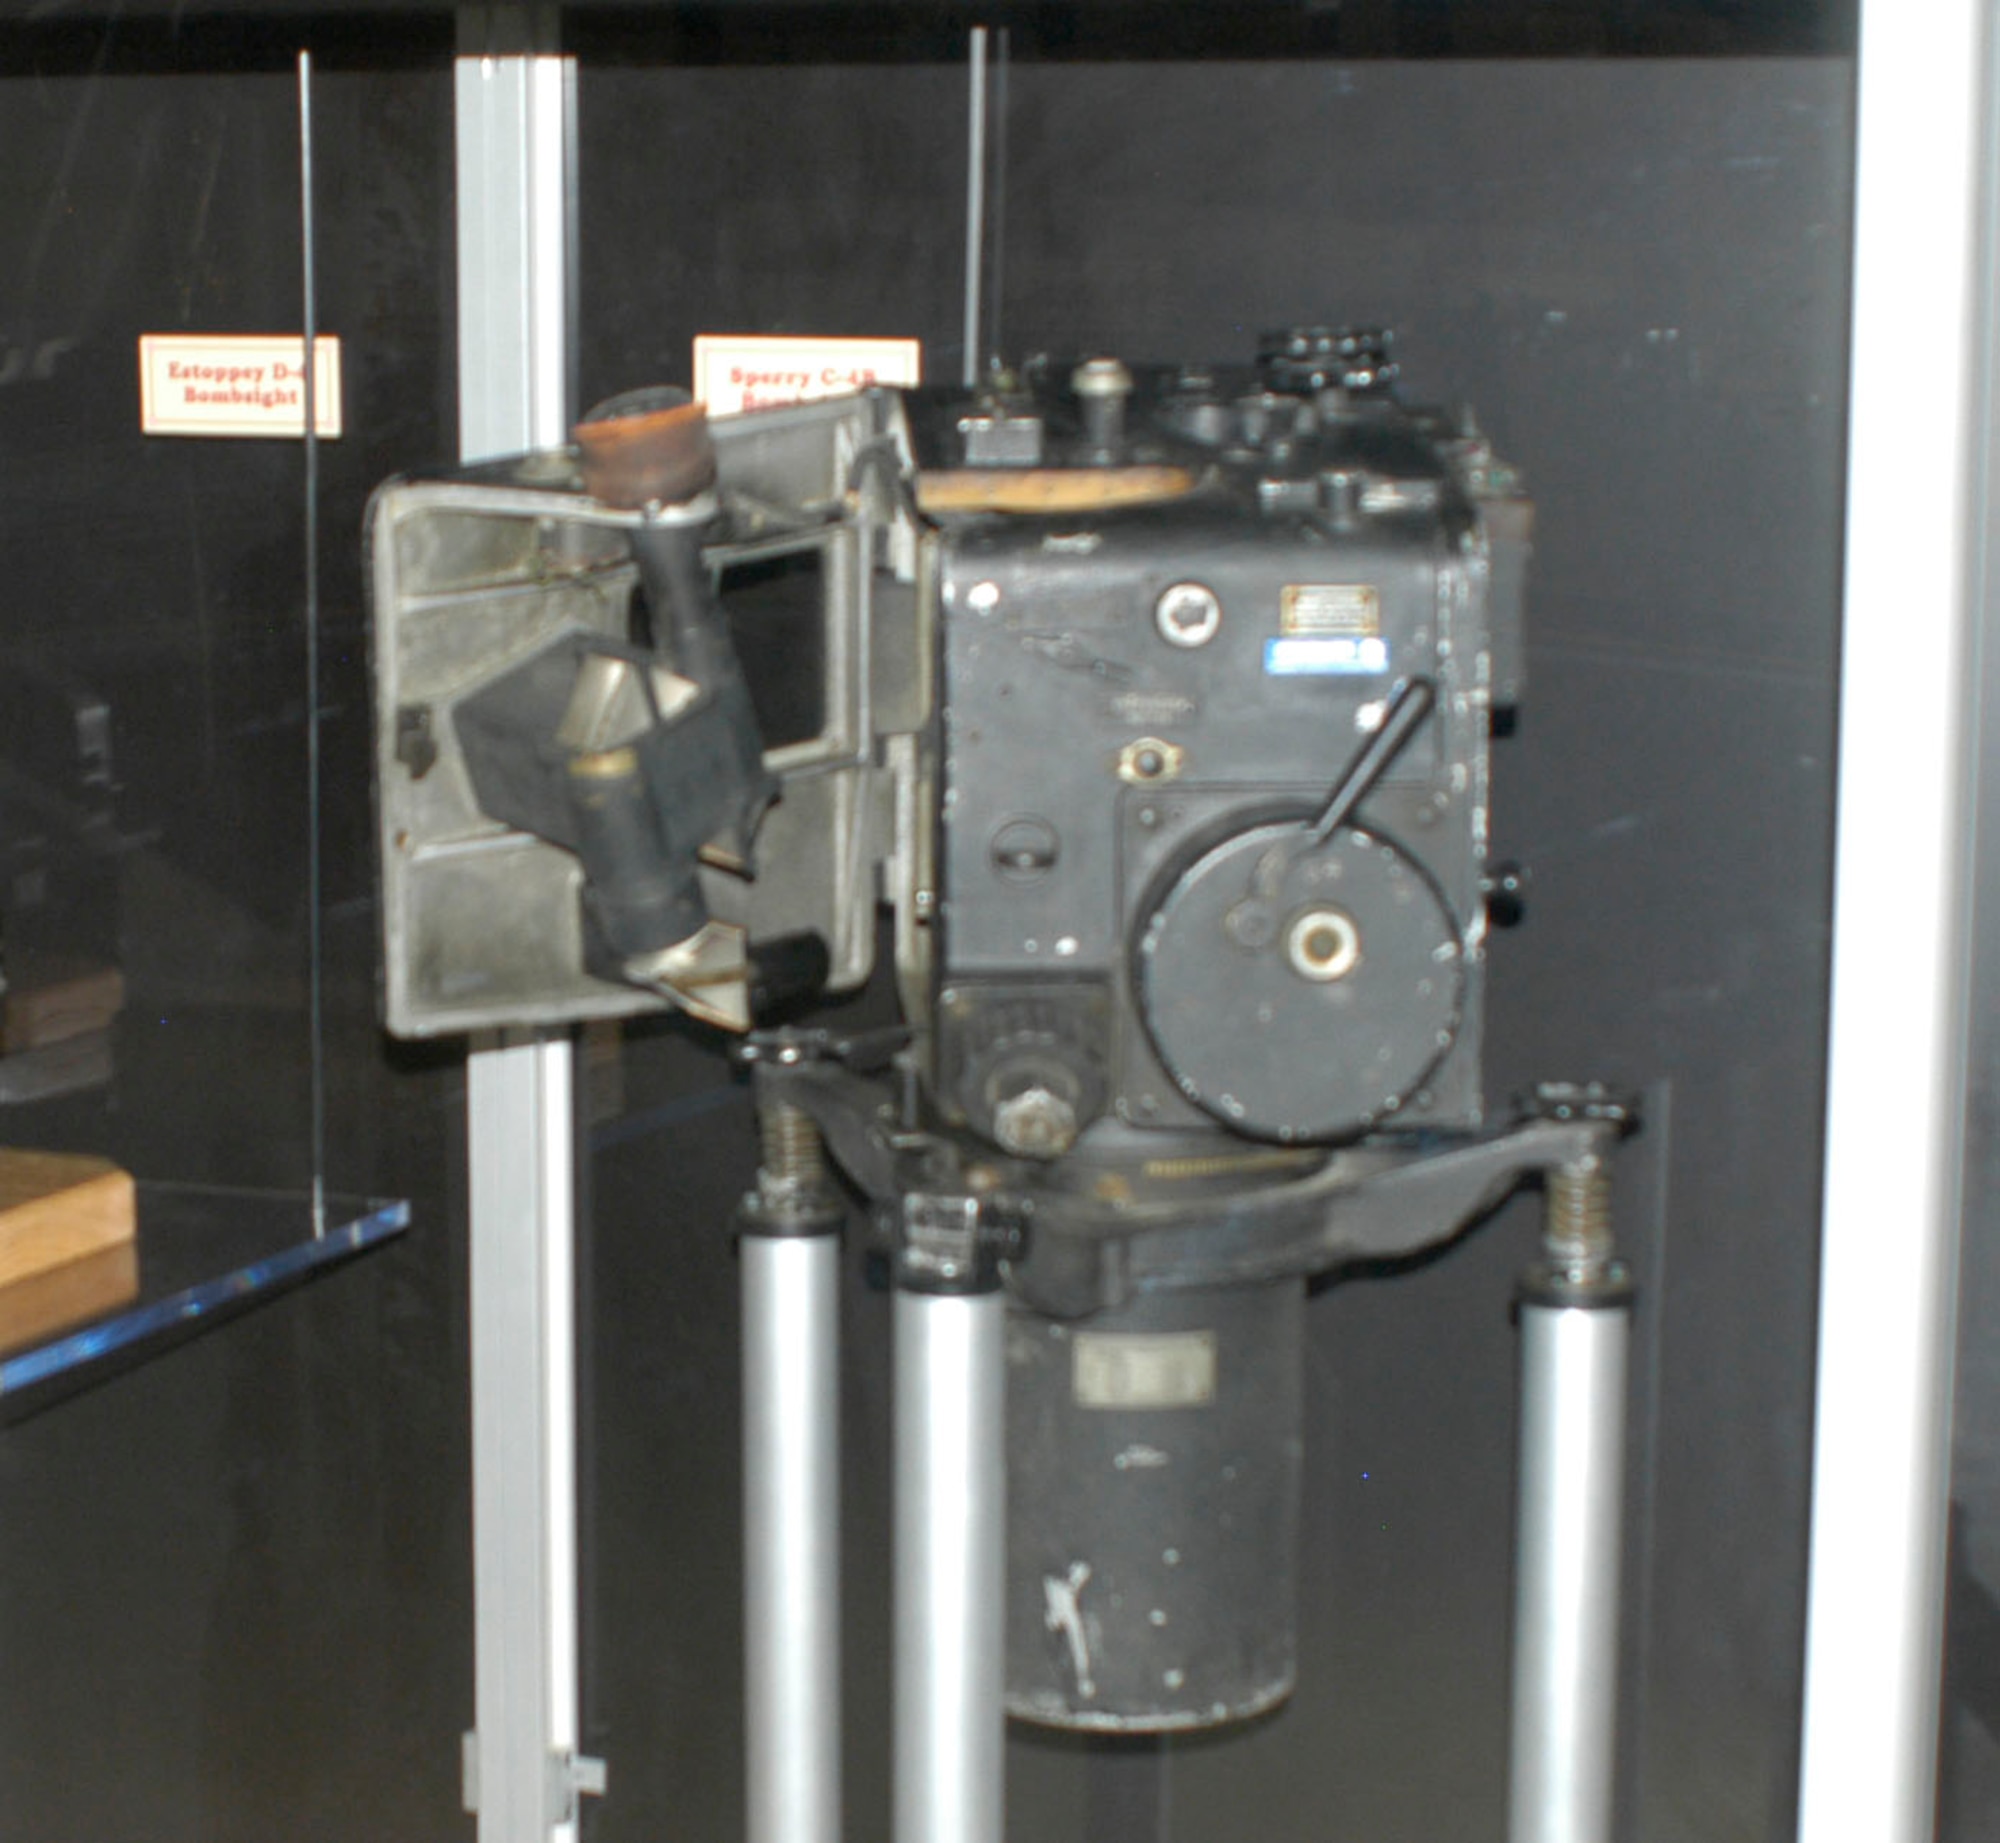 DAYTON, Ohio - Sperry C-4B Bombsight located in the Interwar Bombsight exhibit in the Early Years Gallery at the National Museum of the U.S. Air Force. (U.S. Air Force photo)